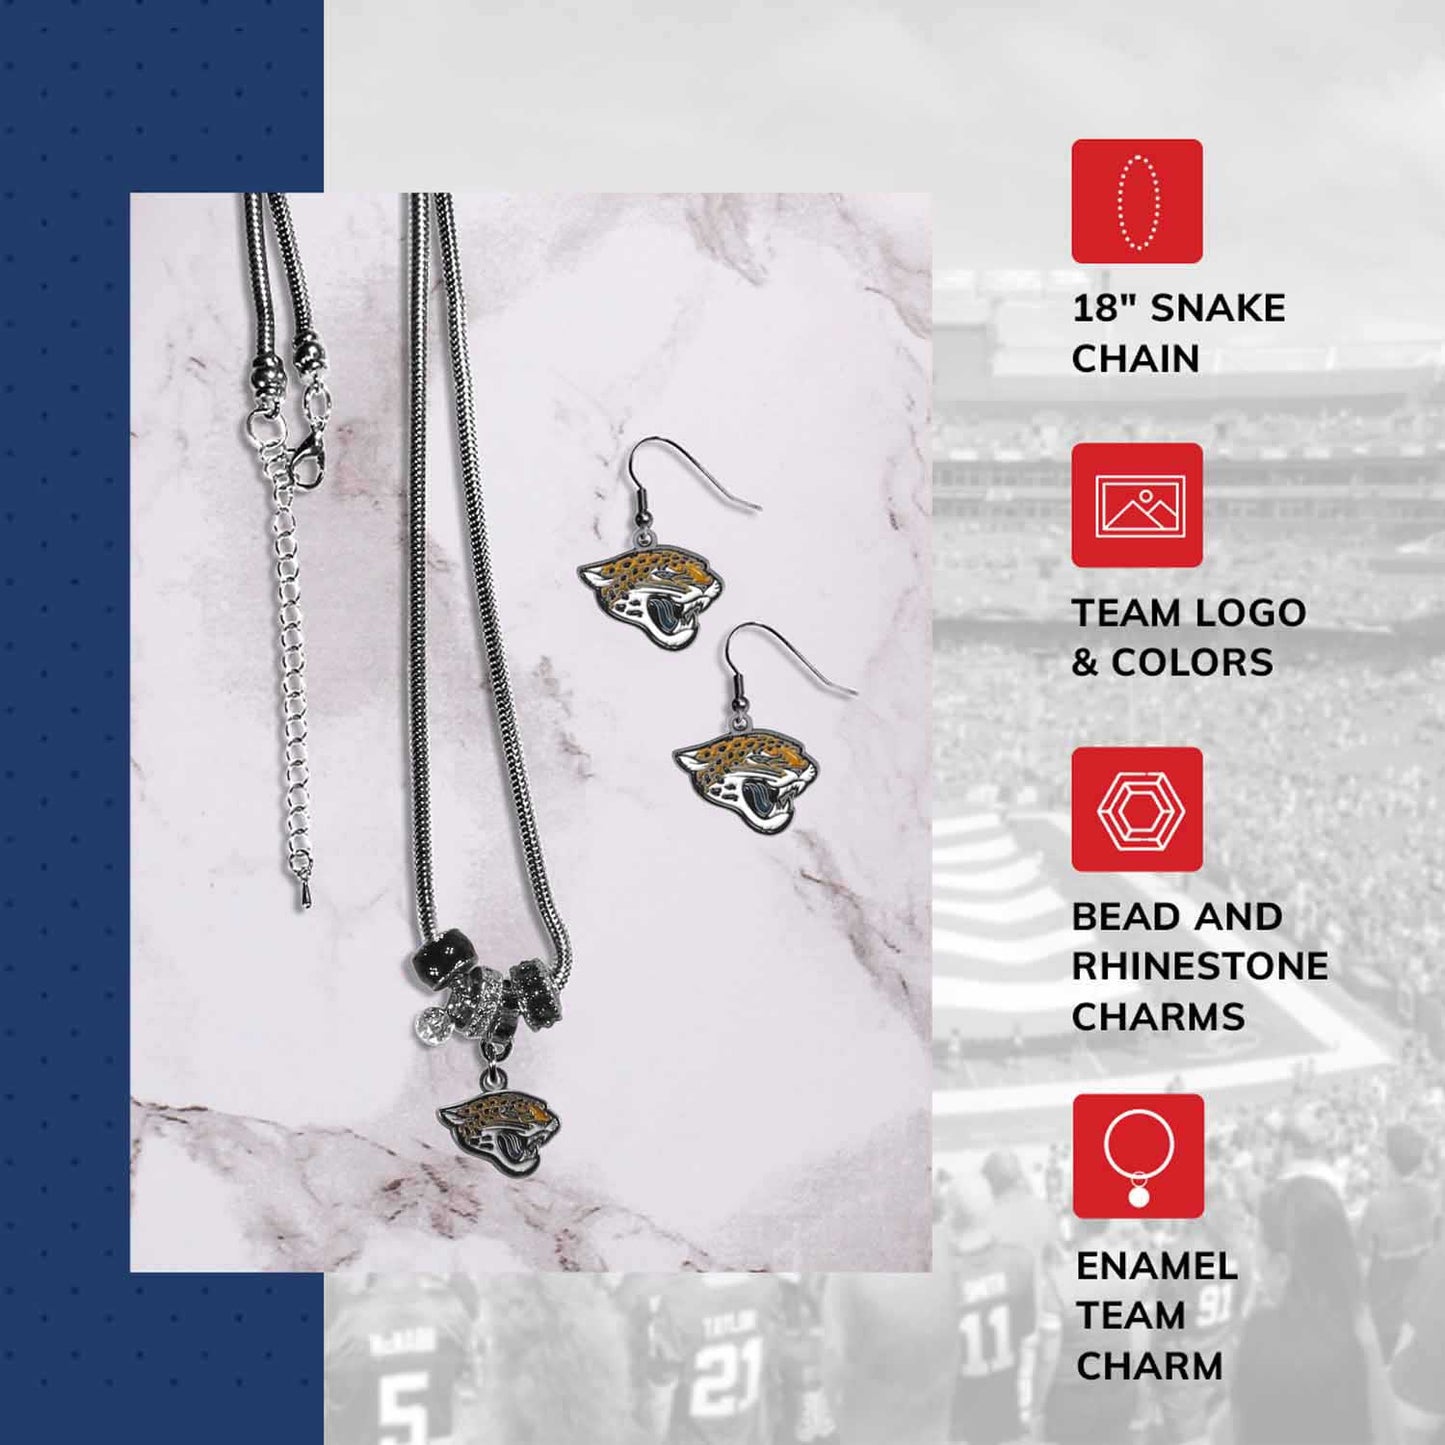 Jacksonville Jaguars NFL Game Day Necklace and Earrings - Silver